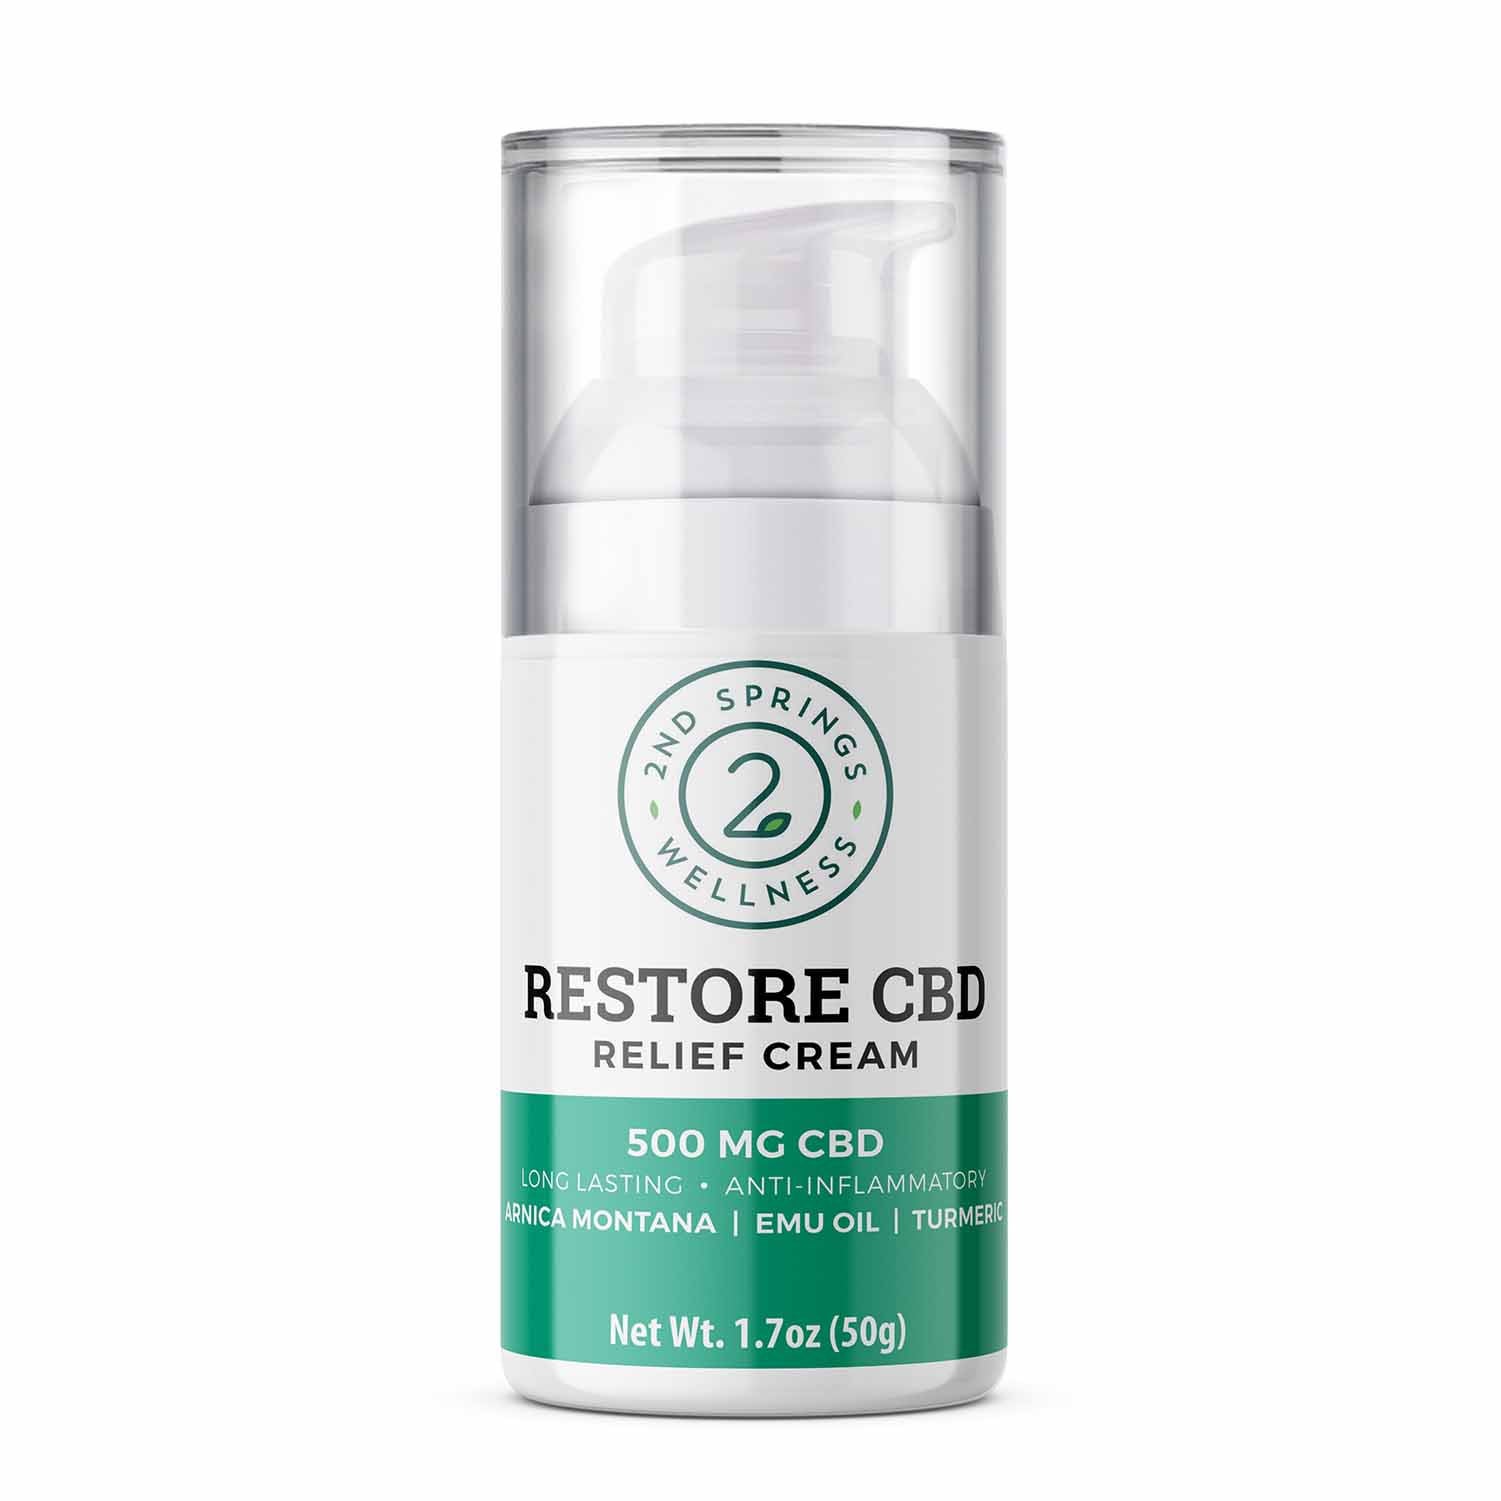 2nd Springs Restore CBD Relief Cream - Powerful Relief, Naturally